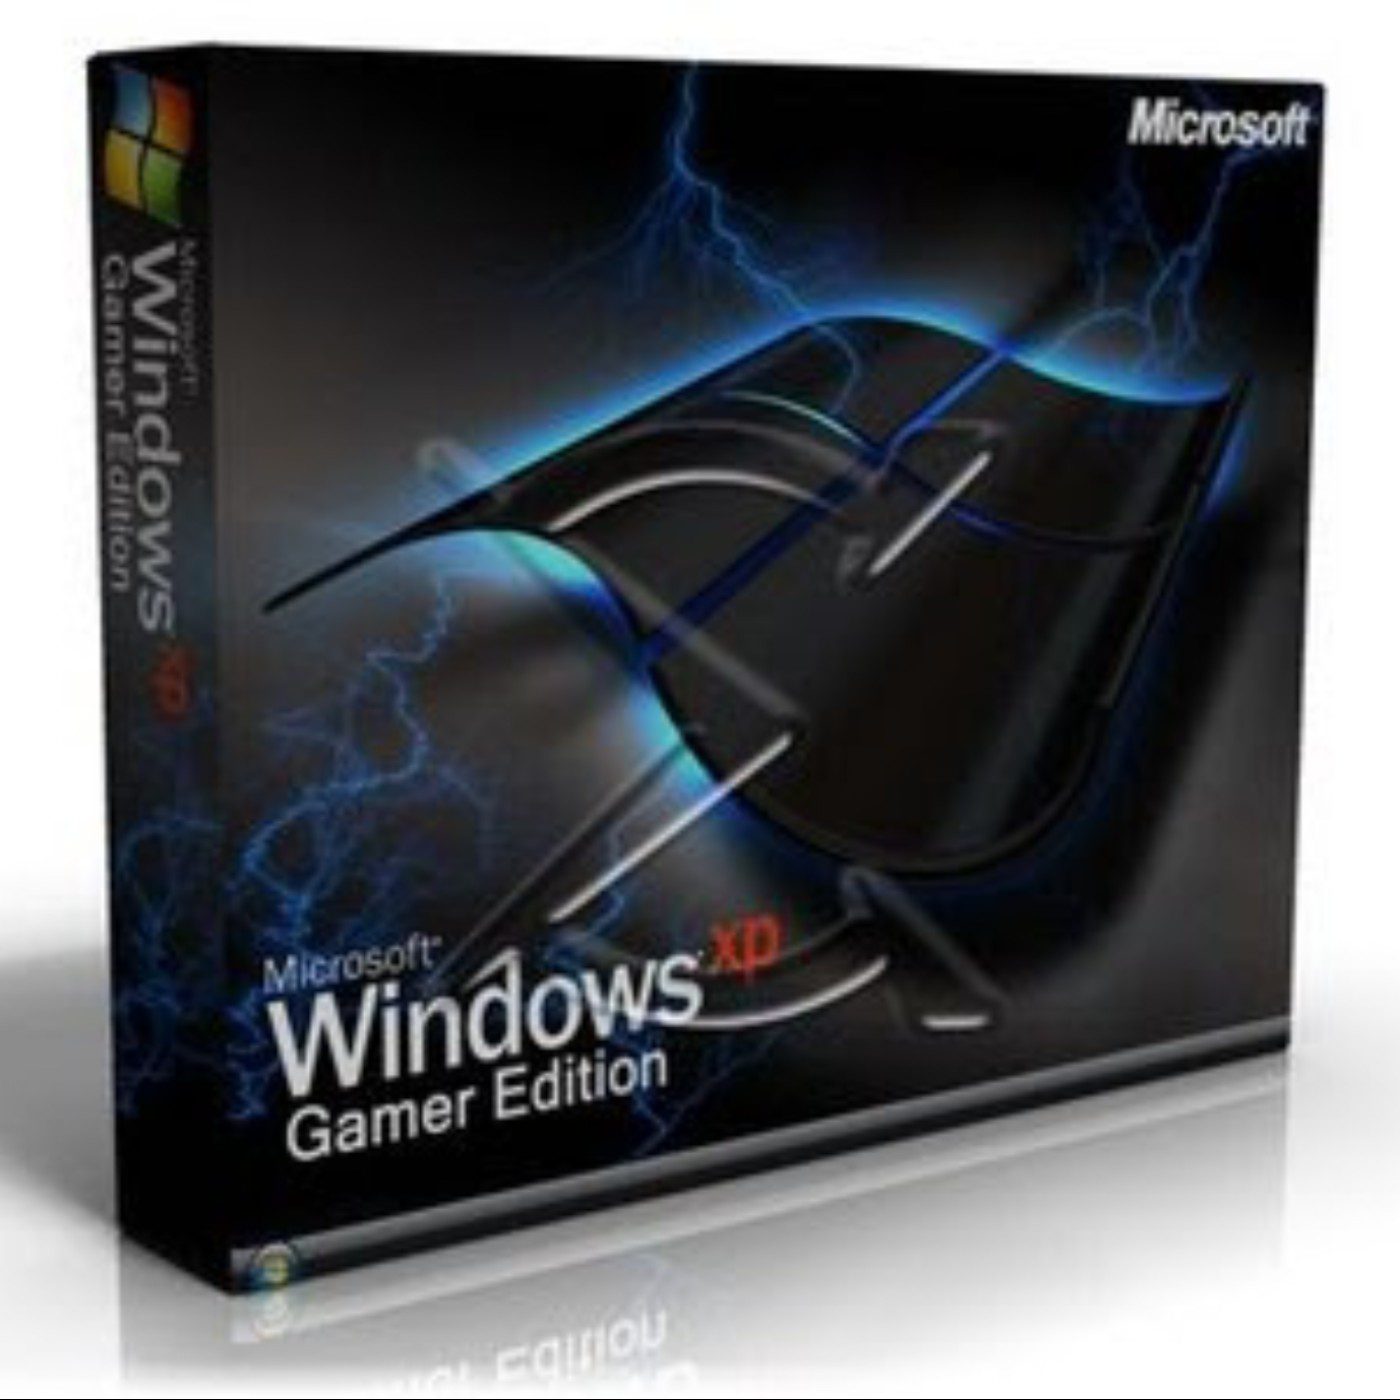 Windows XP Gamer Edition: A specialized version of Windows XP designed for gaming enthusiasts